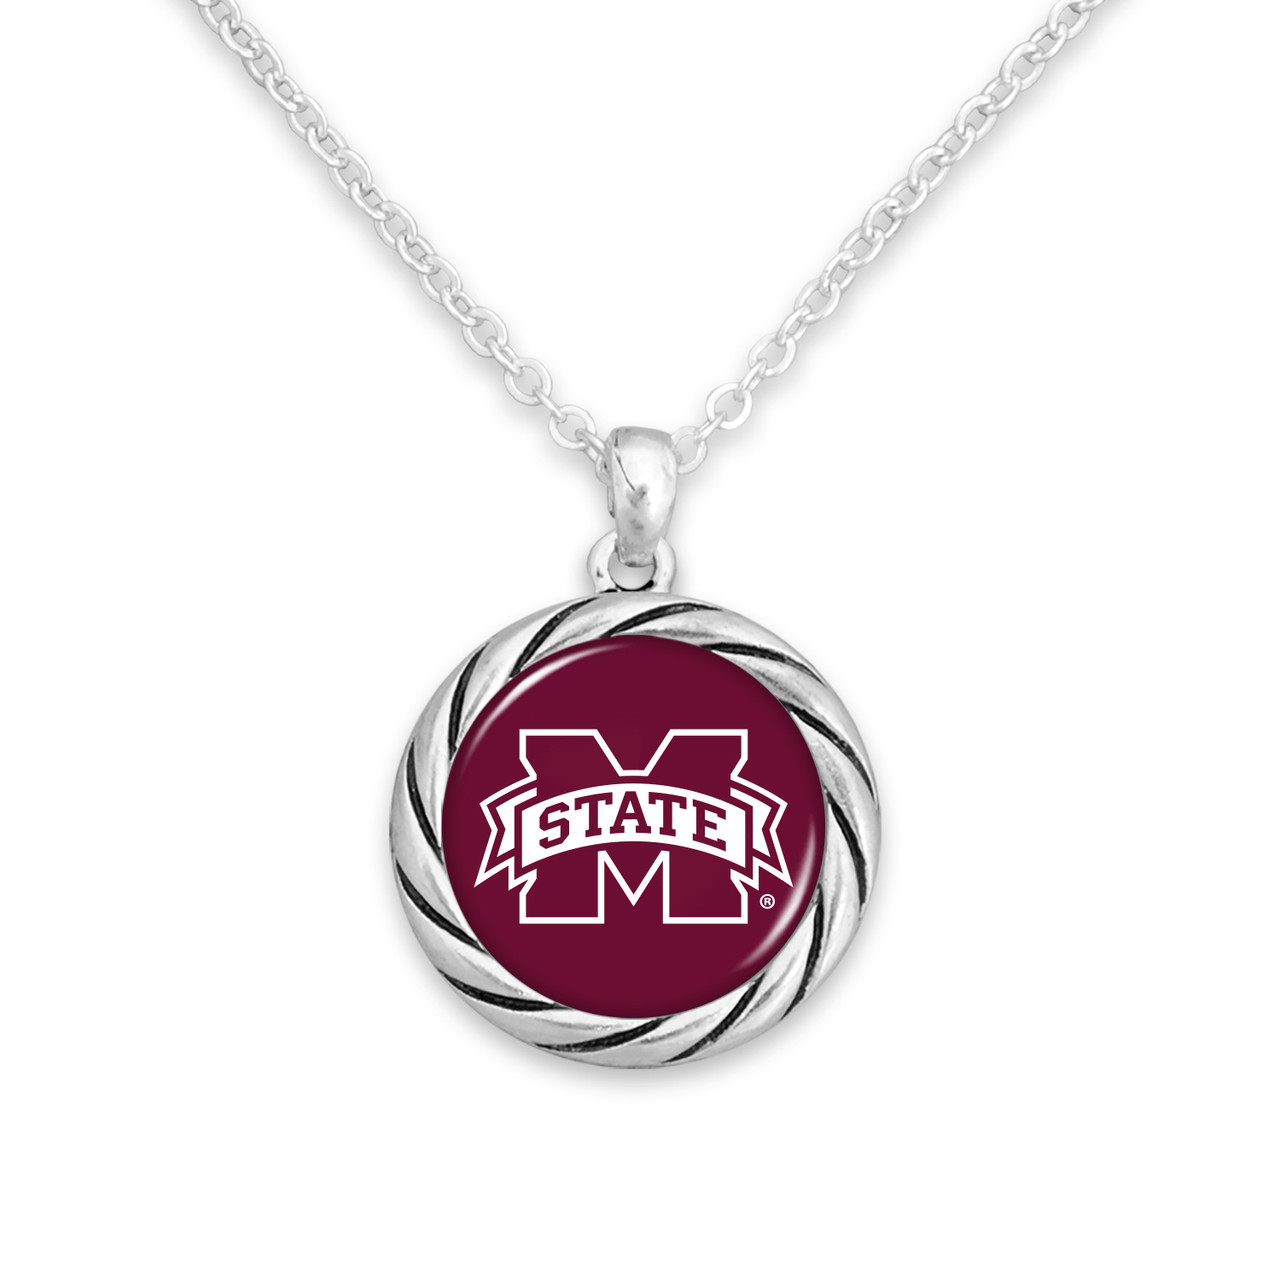 Mississippi State Bulldogs Necklace- Twisted Rope